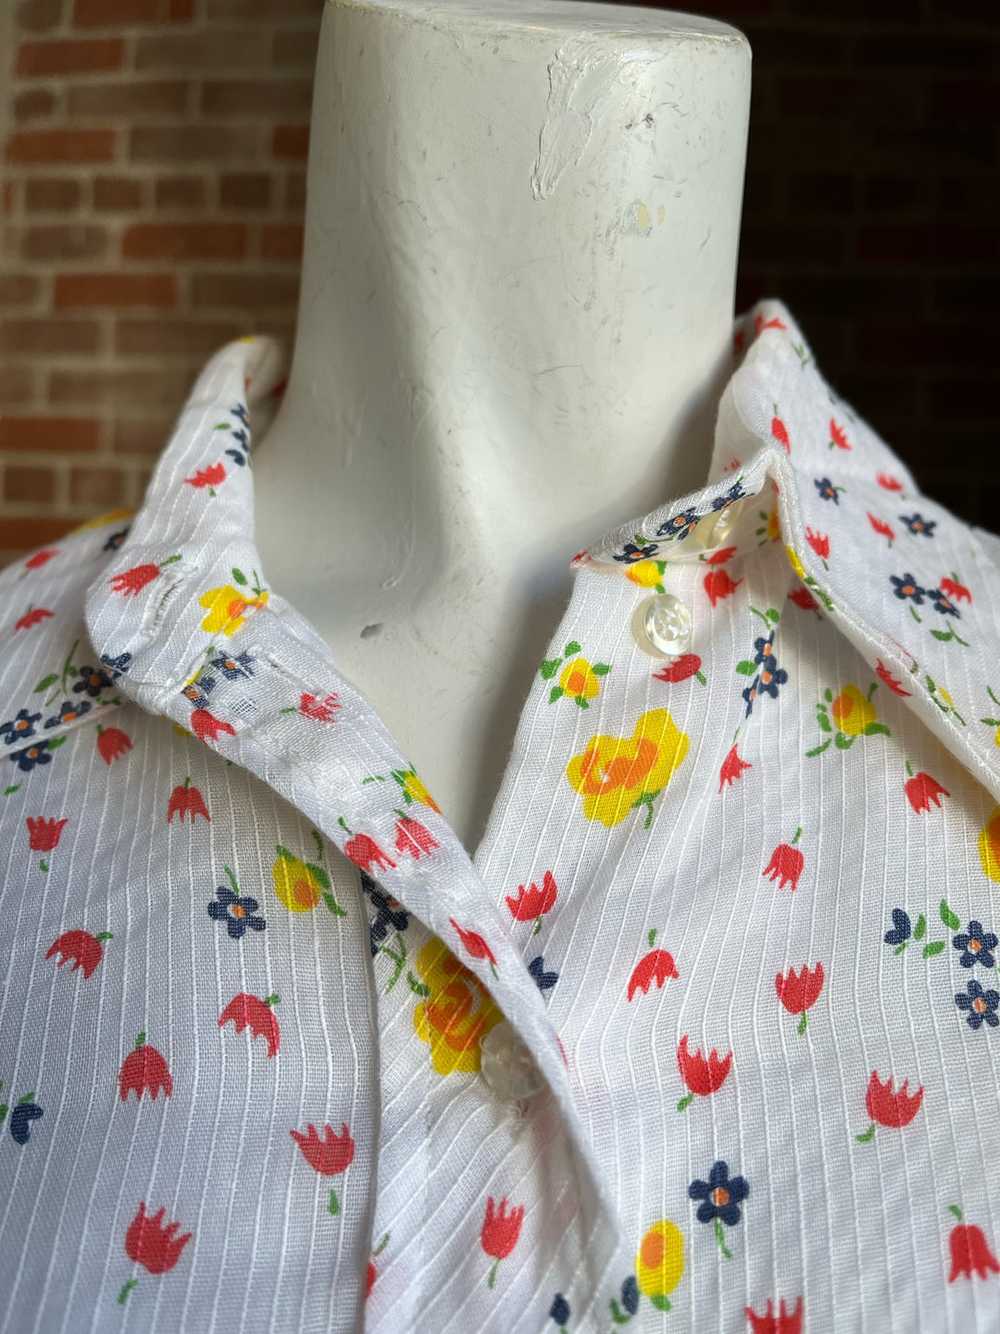 1970s Floral Sheer Top - image 7